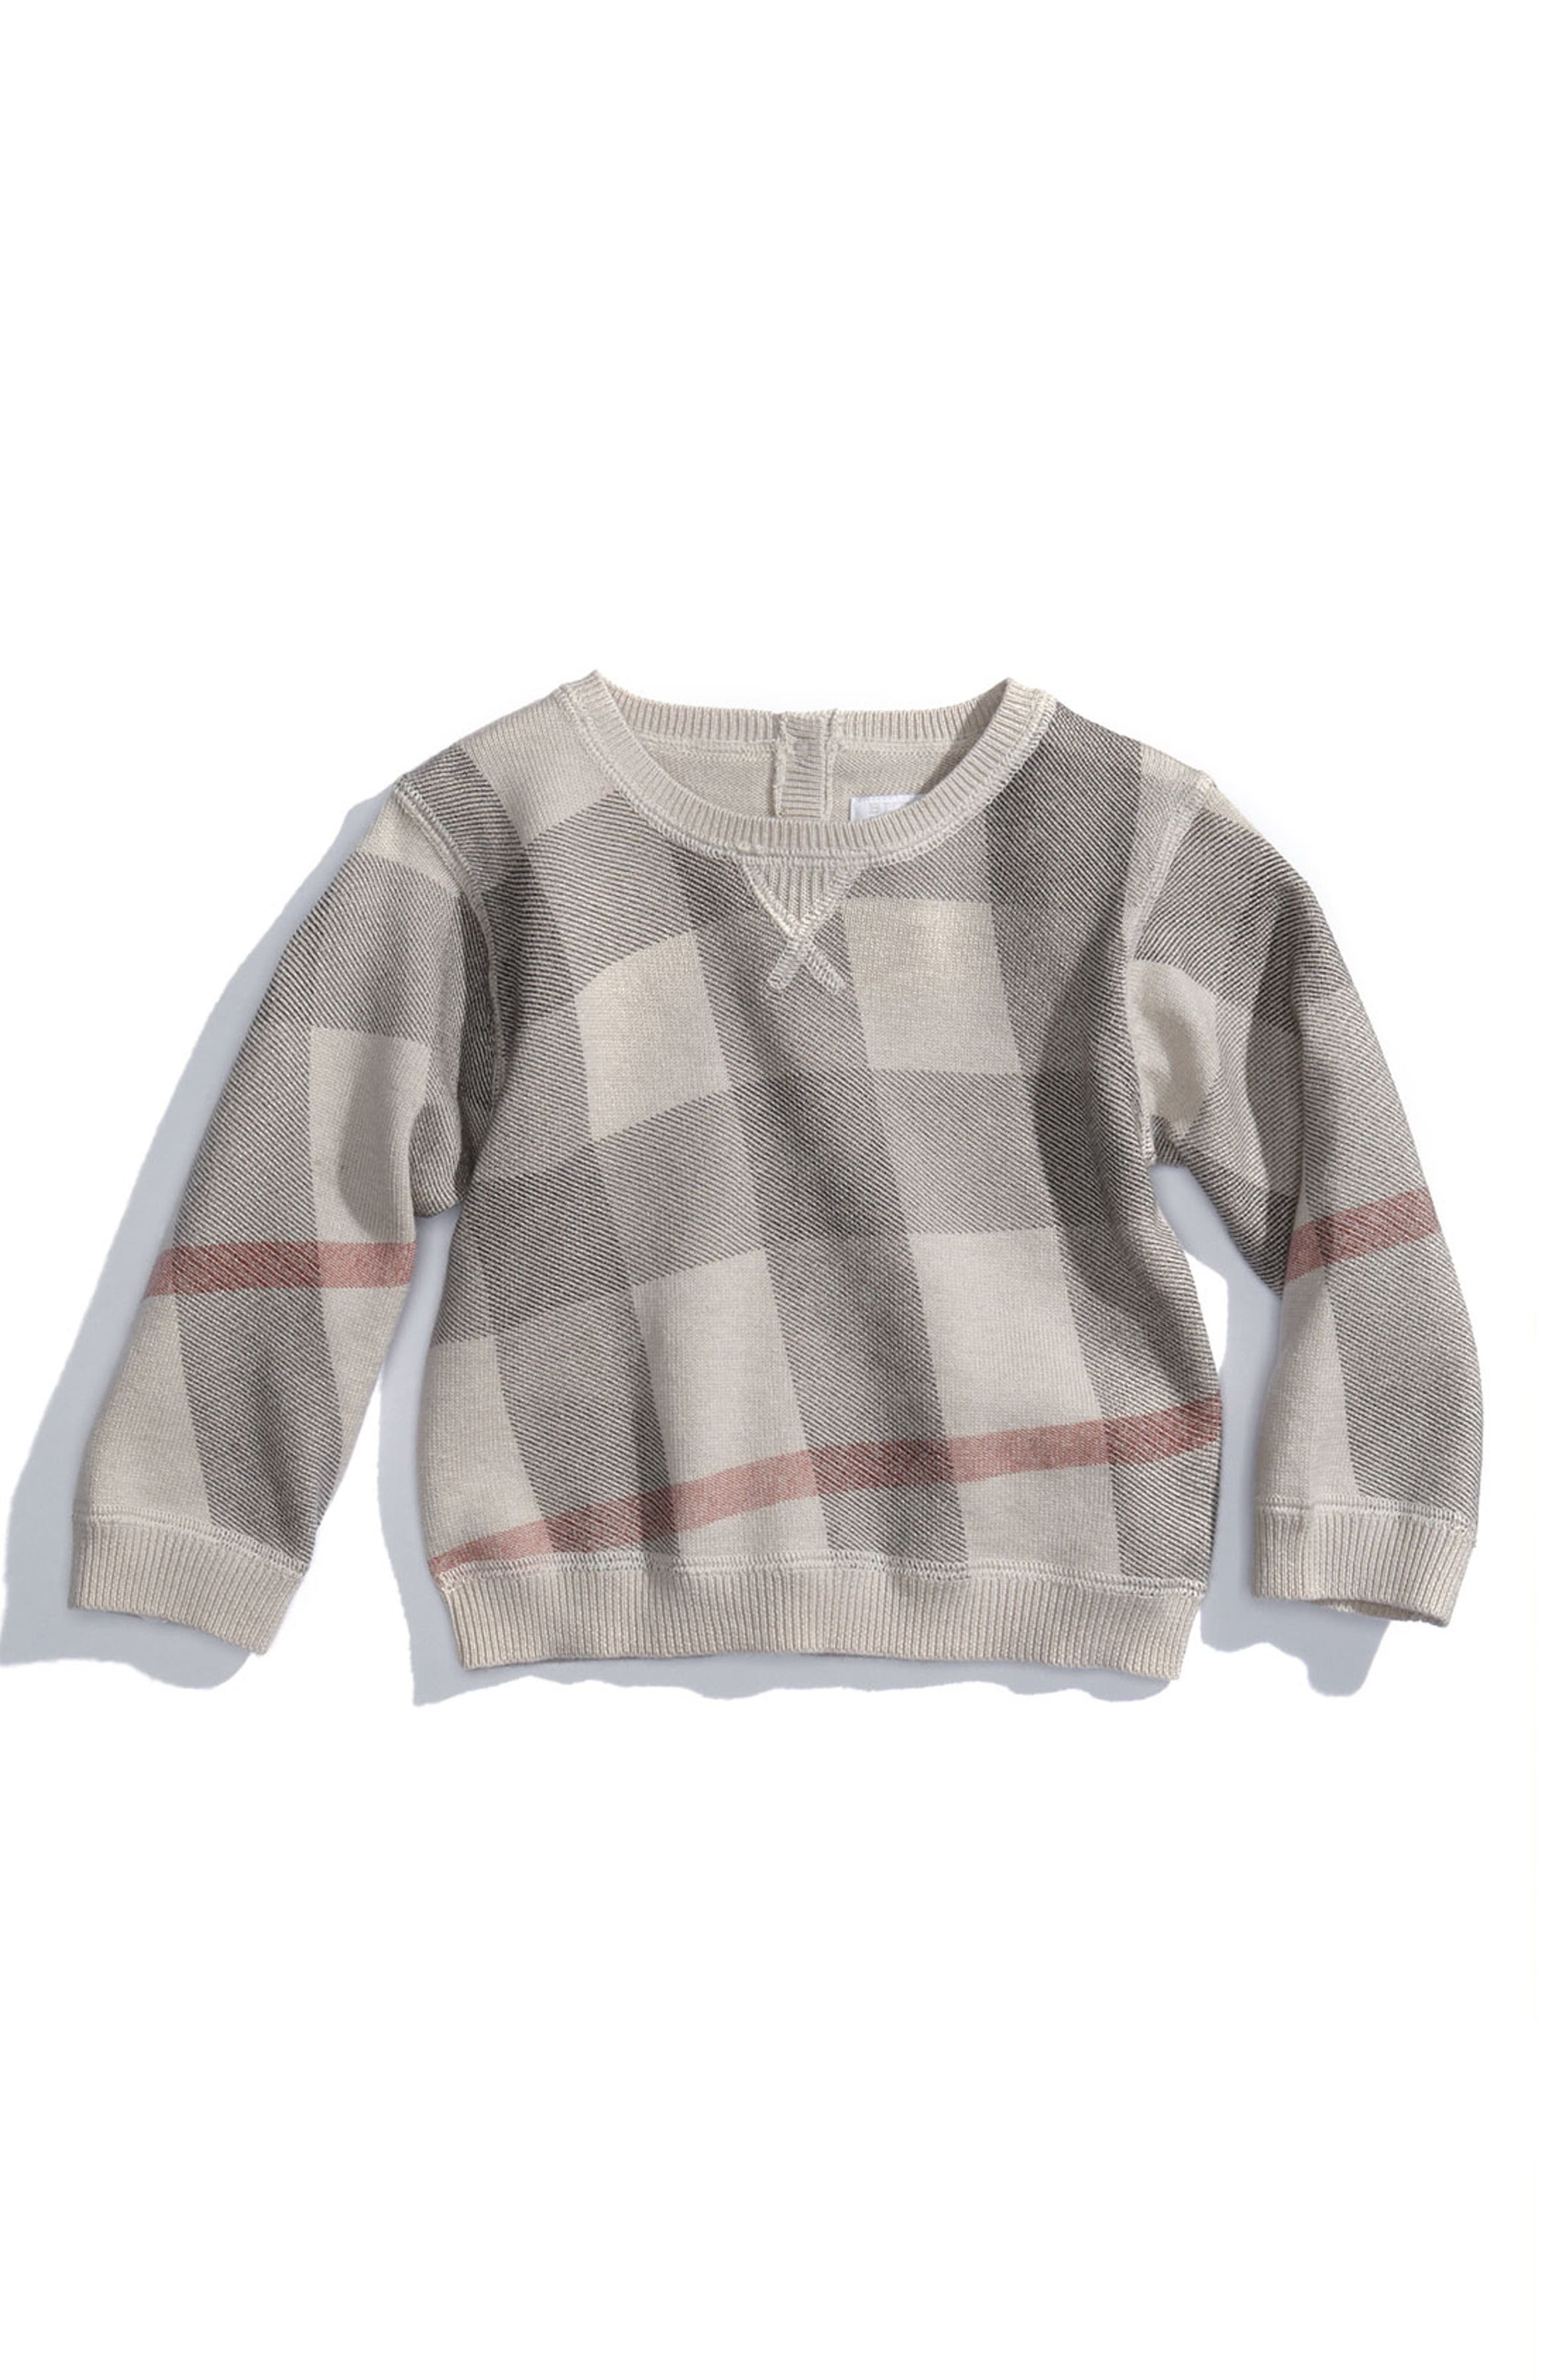 Burberry Check Print Sweater (Infant) | Nordstrom